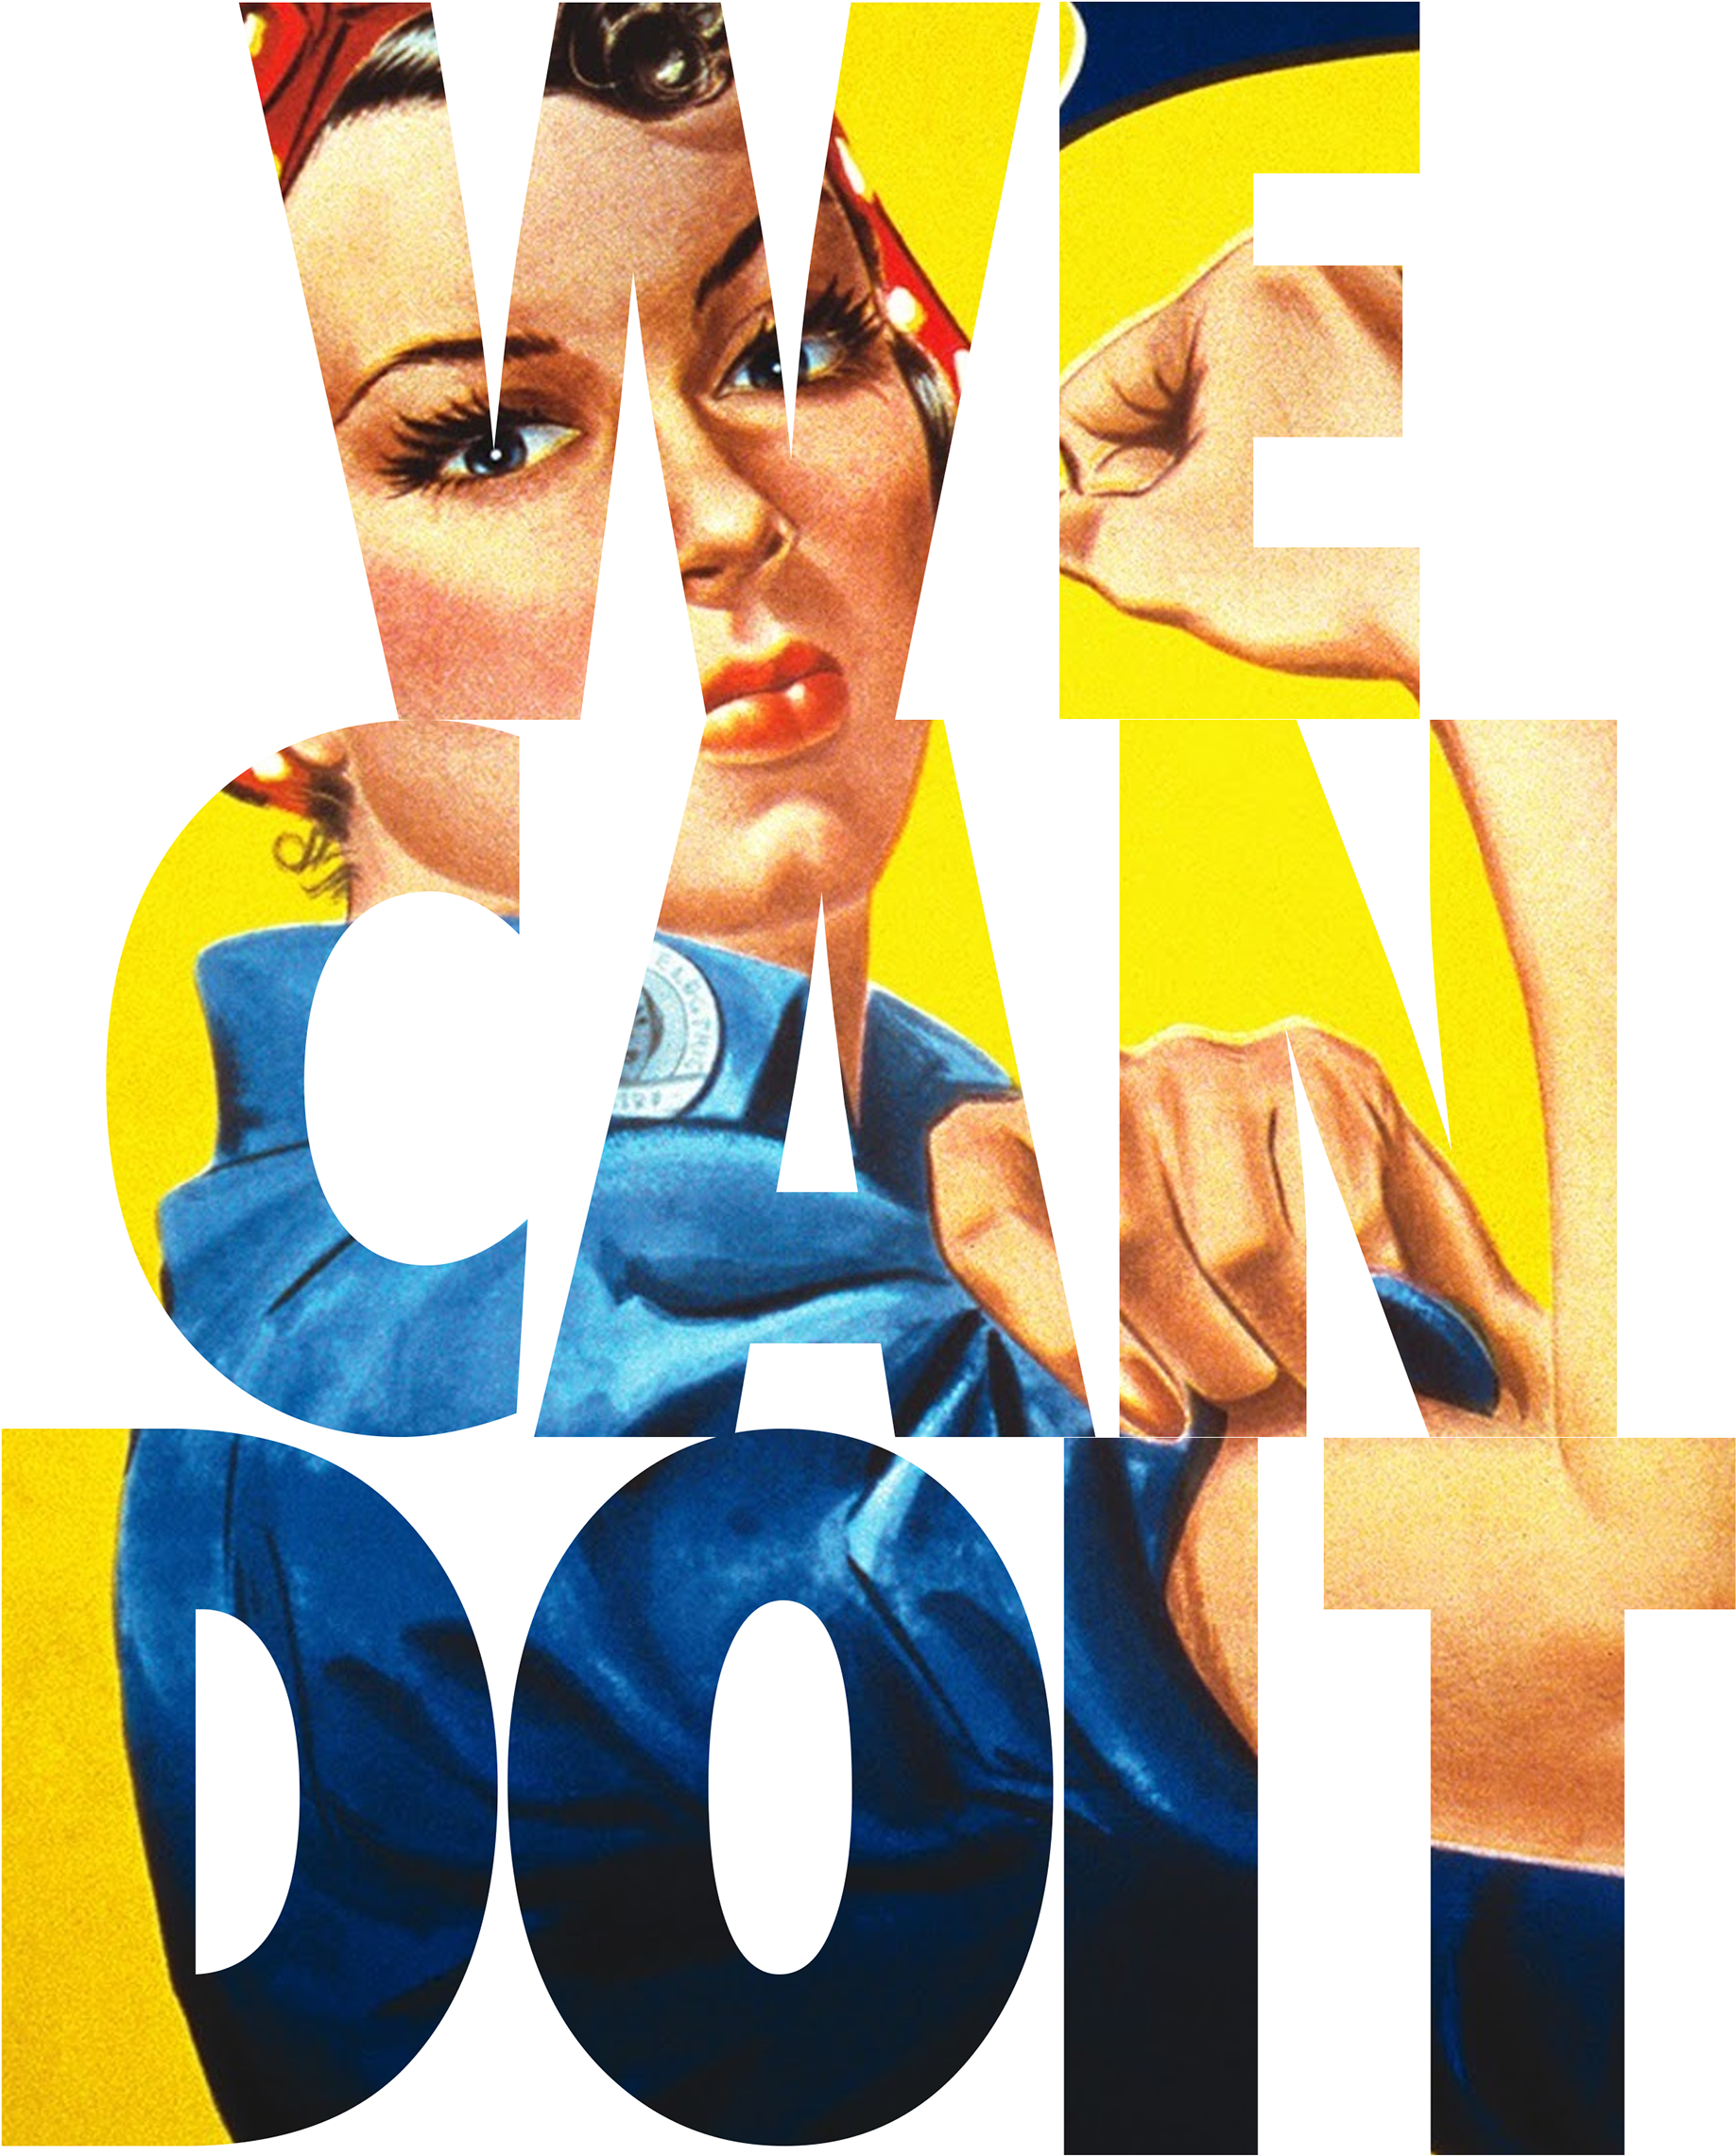 The "we Can Do It" Poster Is Inspired By The Iconic - Oxford Insight History 9 For Nsw By Bruce Dennett (1920x2560)